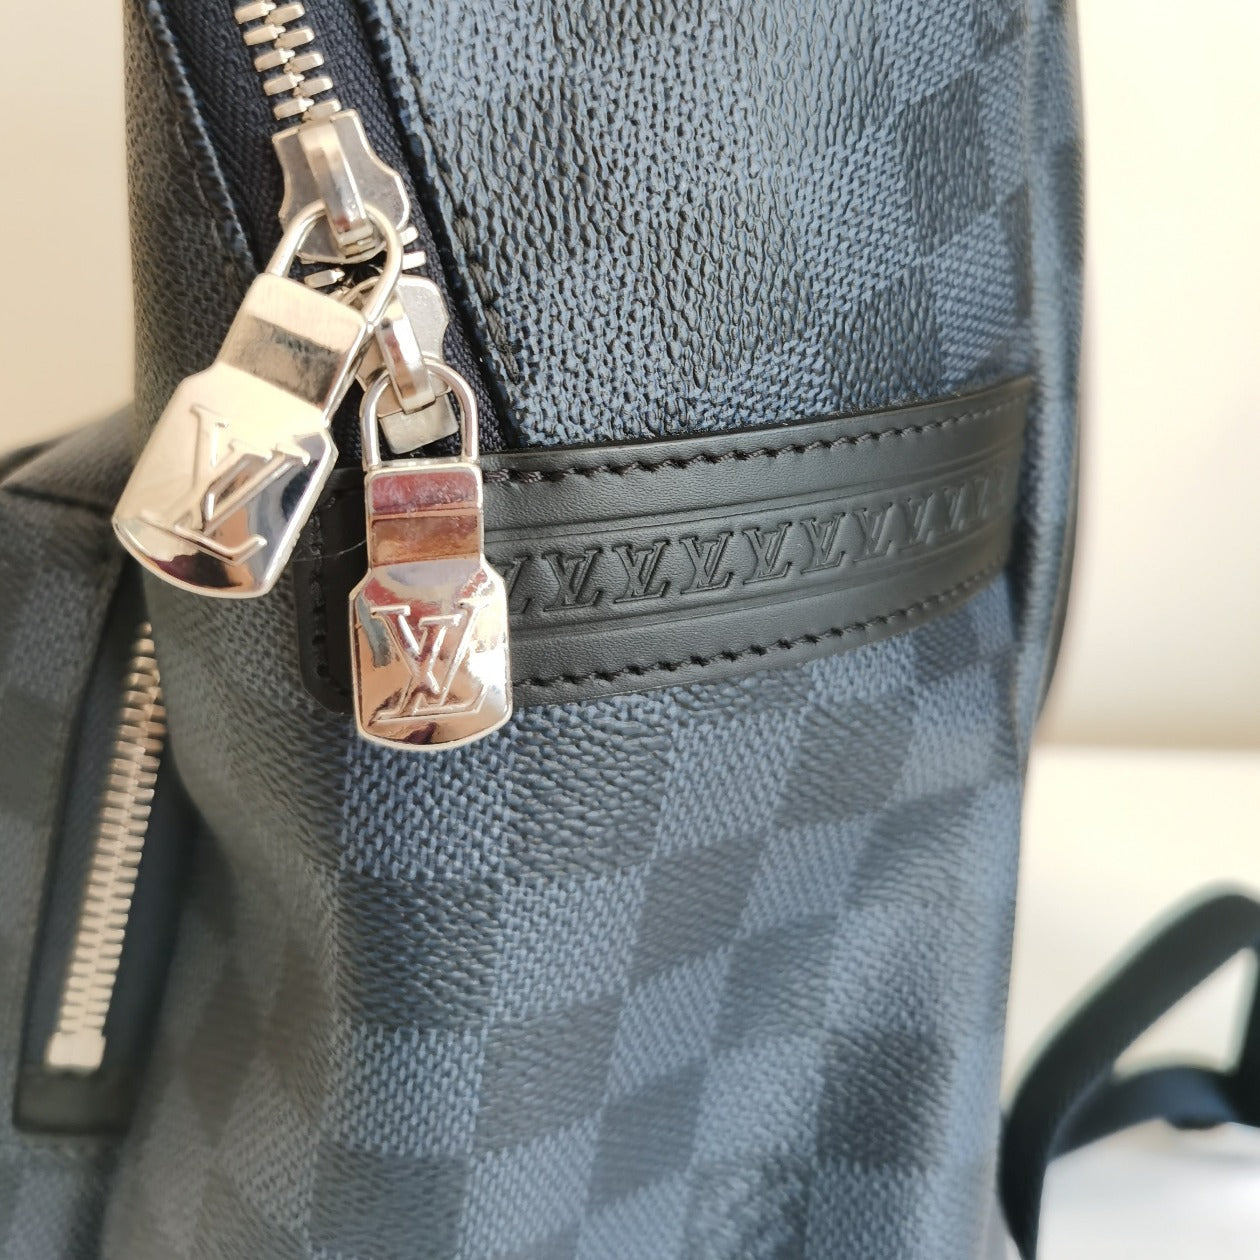 Louis Vuitton Backpack Apollo Latitude Damier Cobalt America's Cup Printed  Blue/Grey/White/Red in Canvas with Metal - US